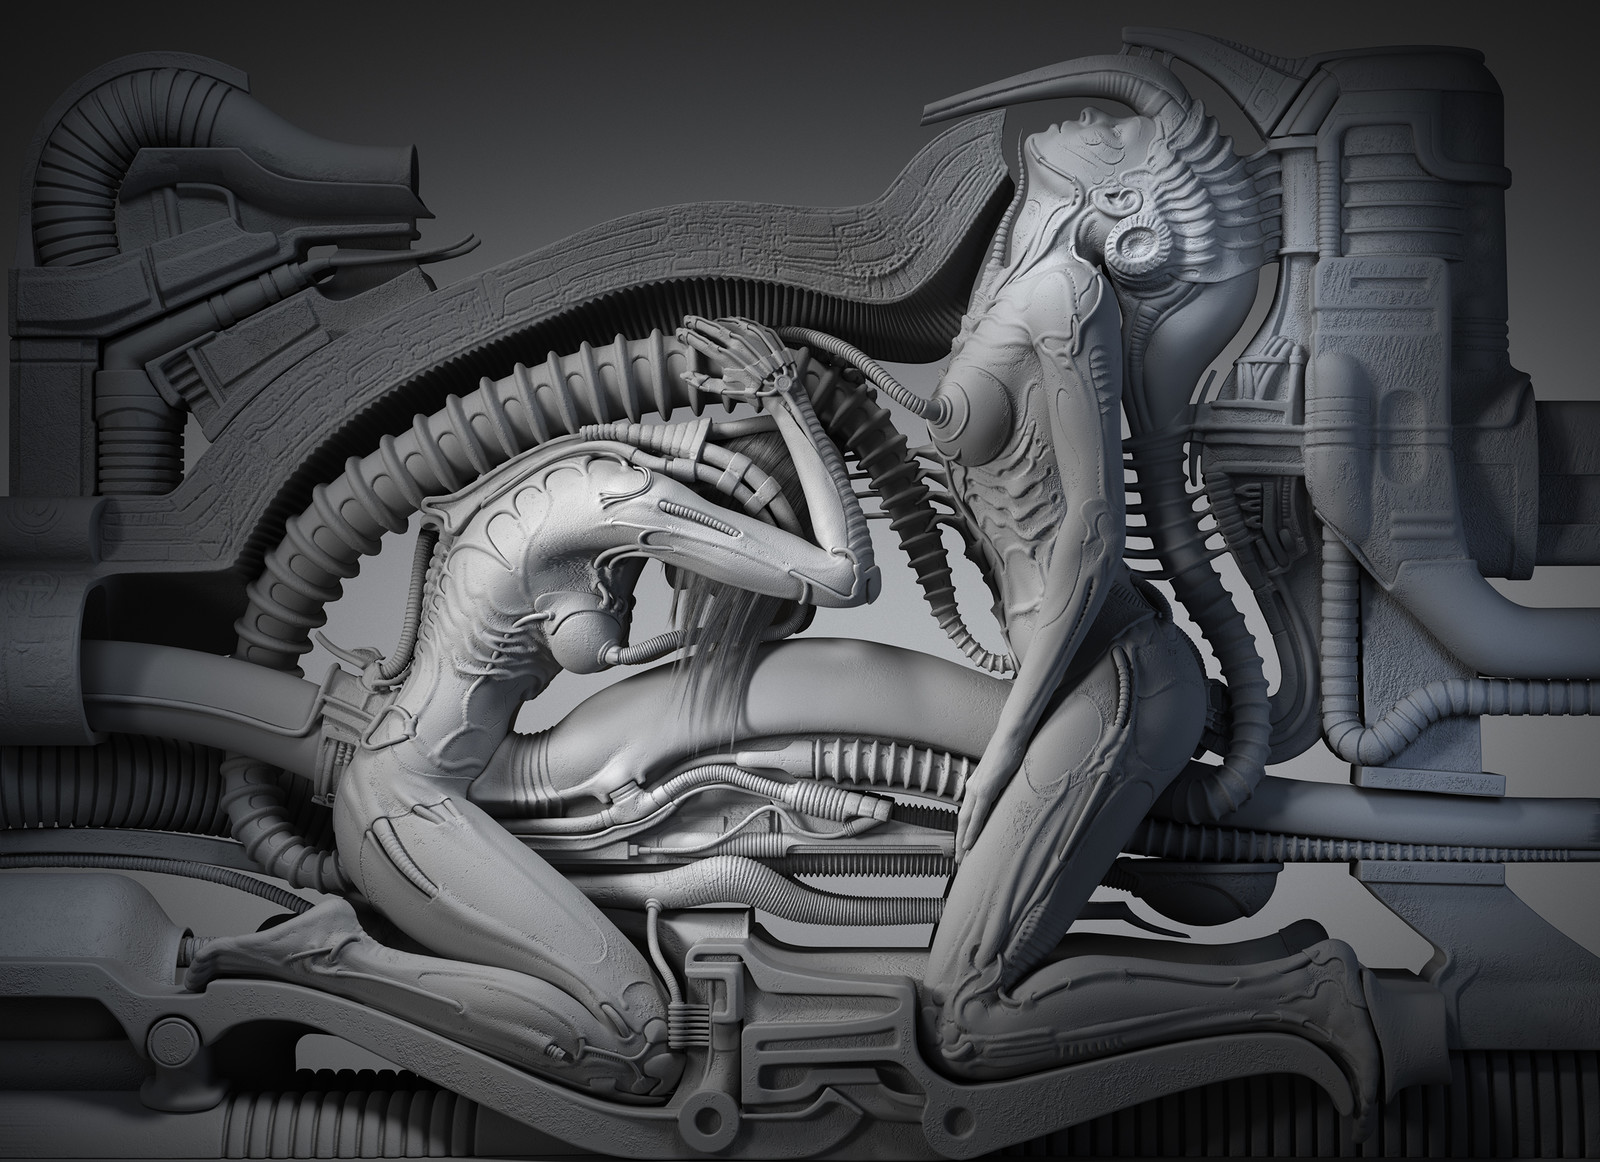 H. R. Giger tribute.